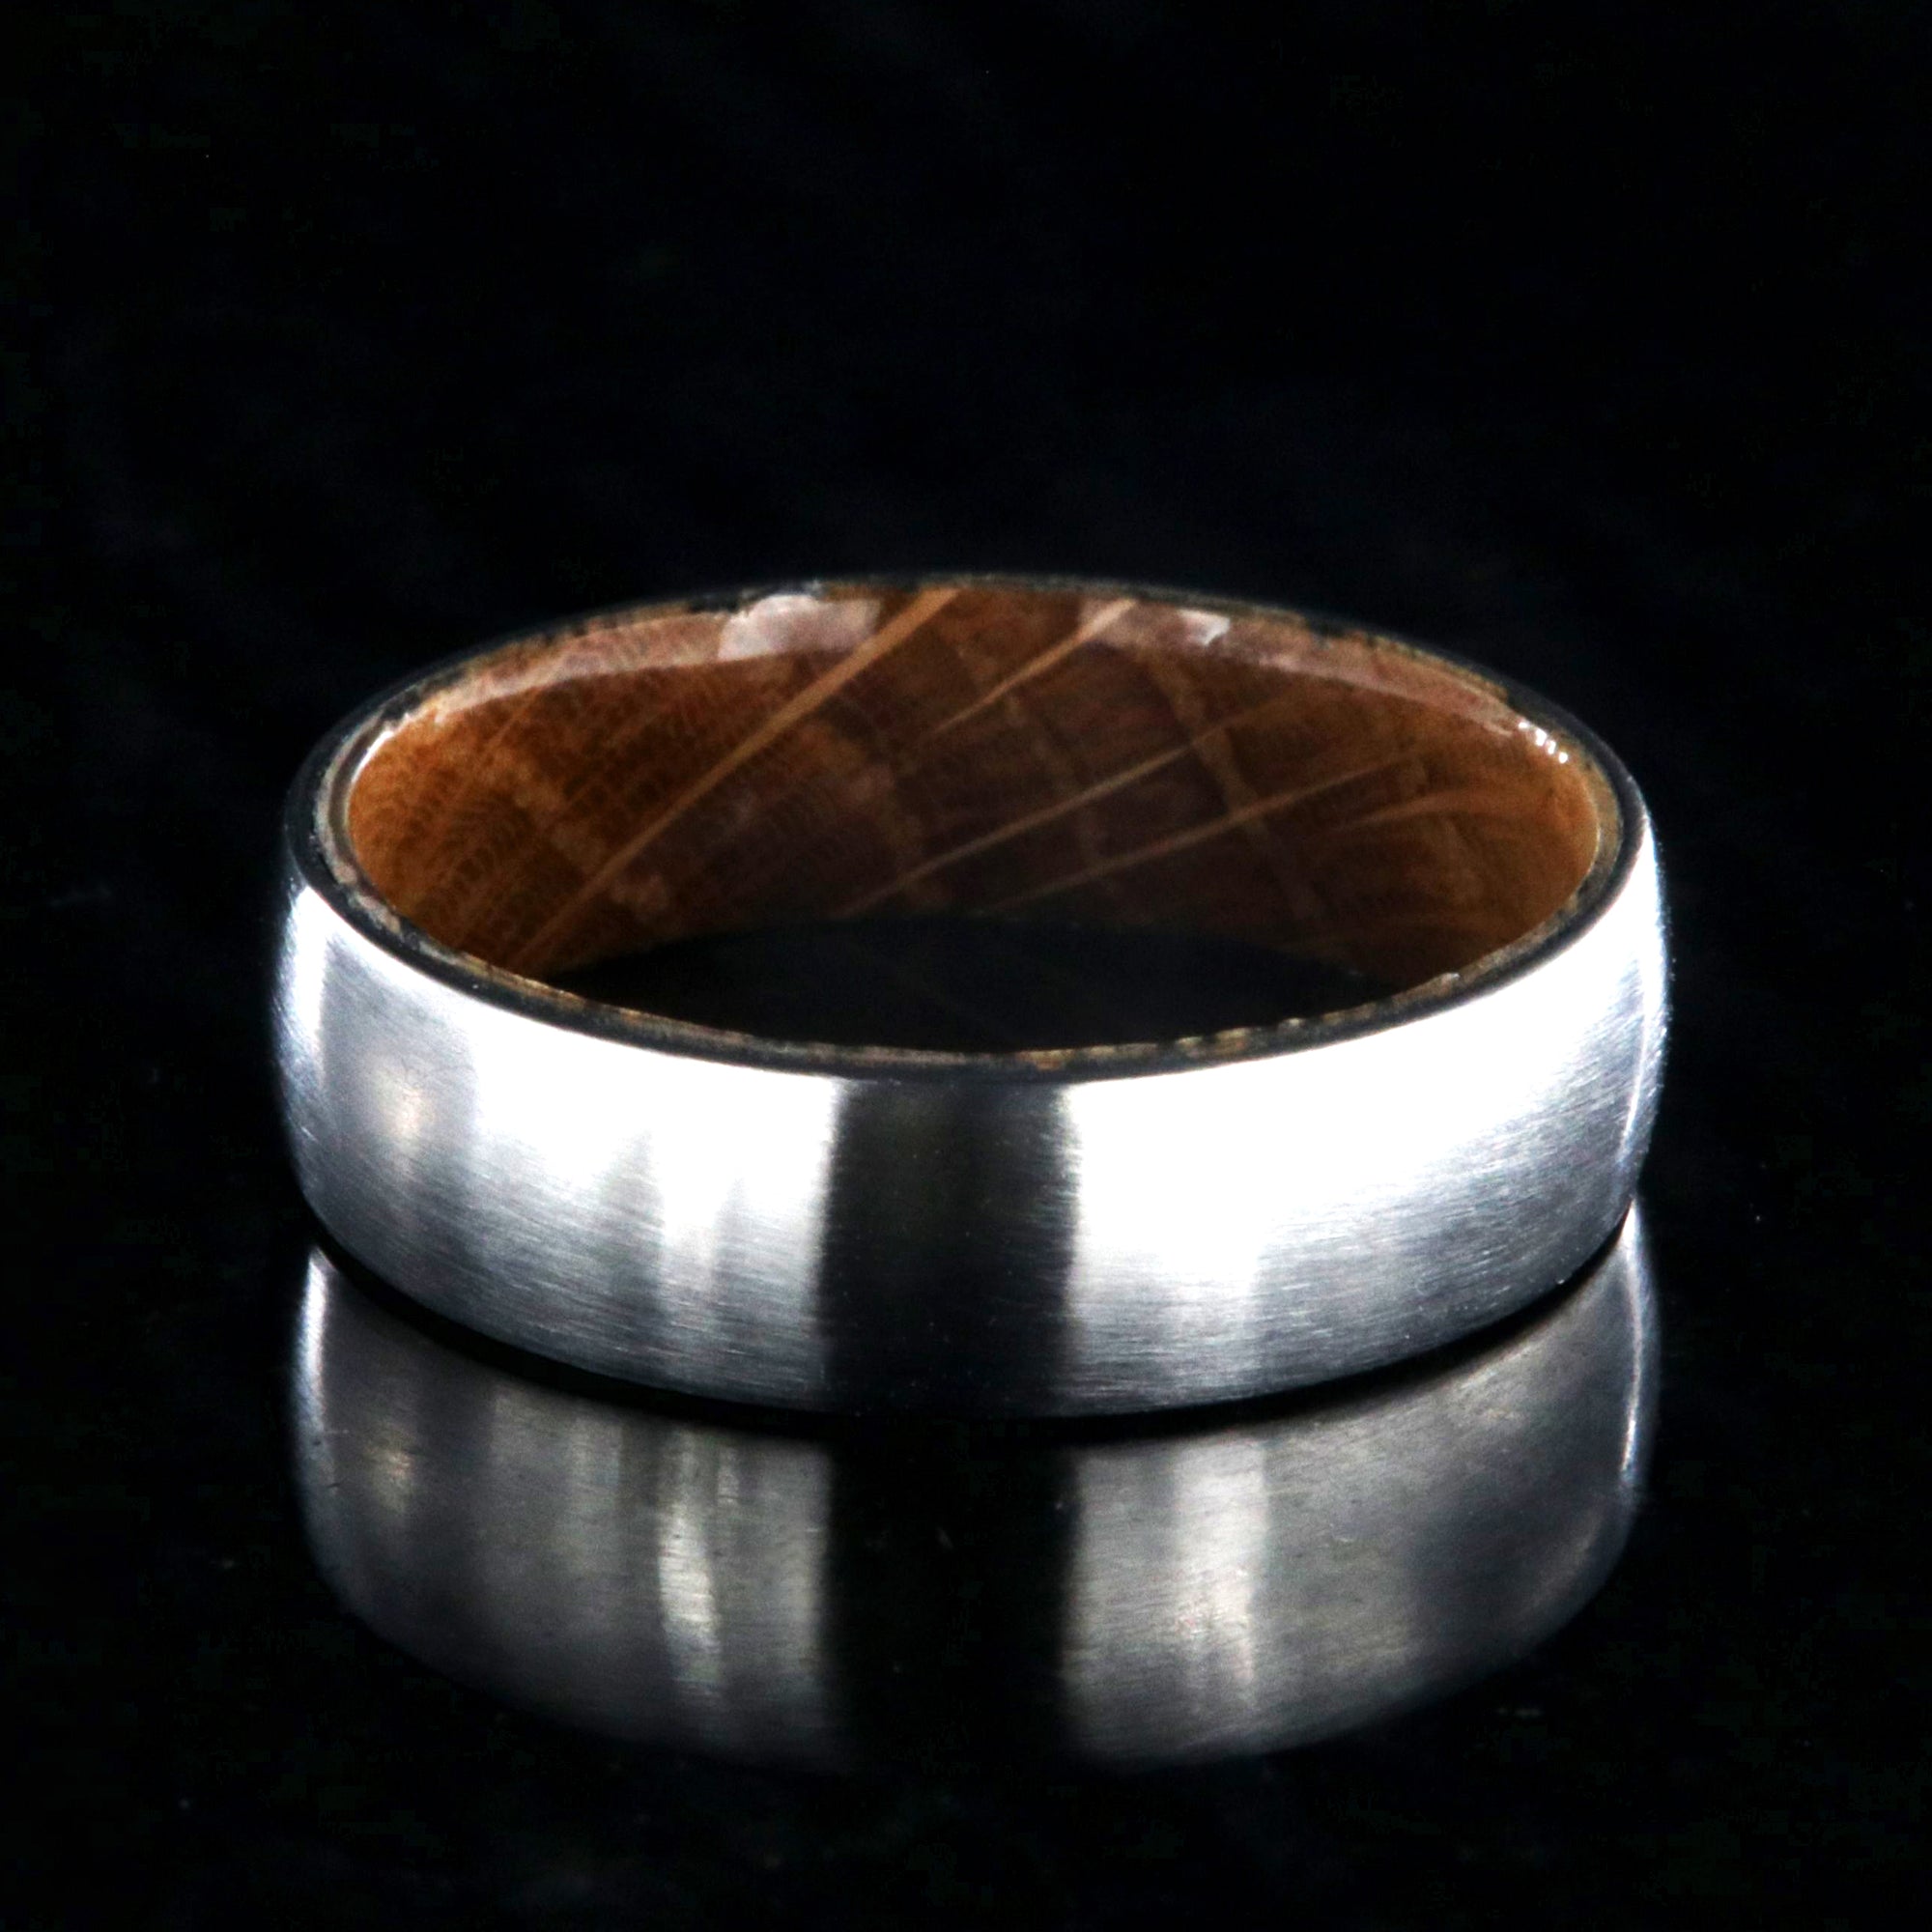 6mm wide cobalt wedding band with a brushed finish and a whiskey barrel sleeve